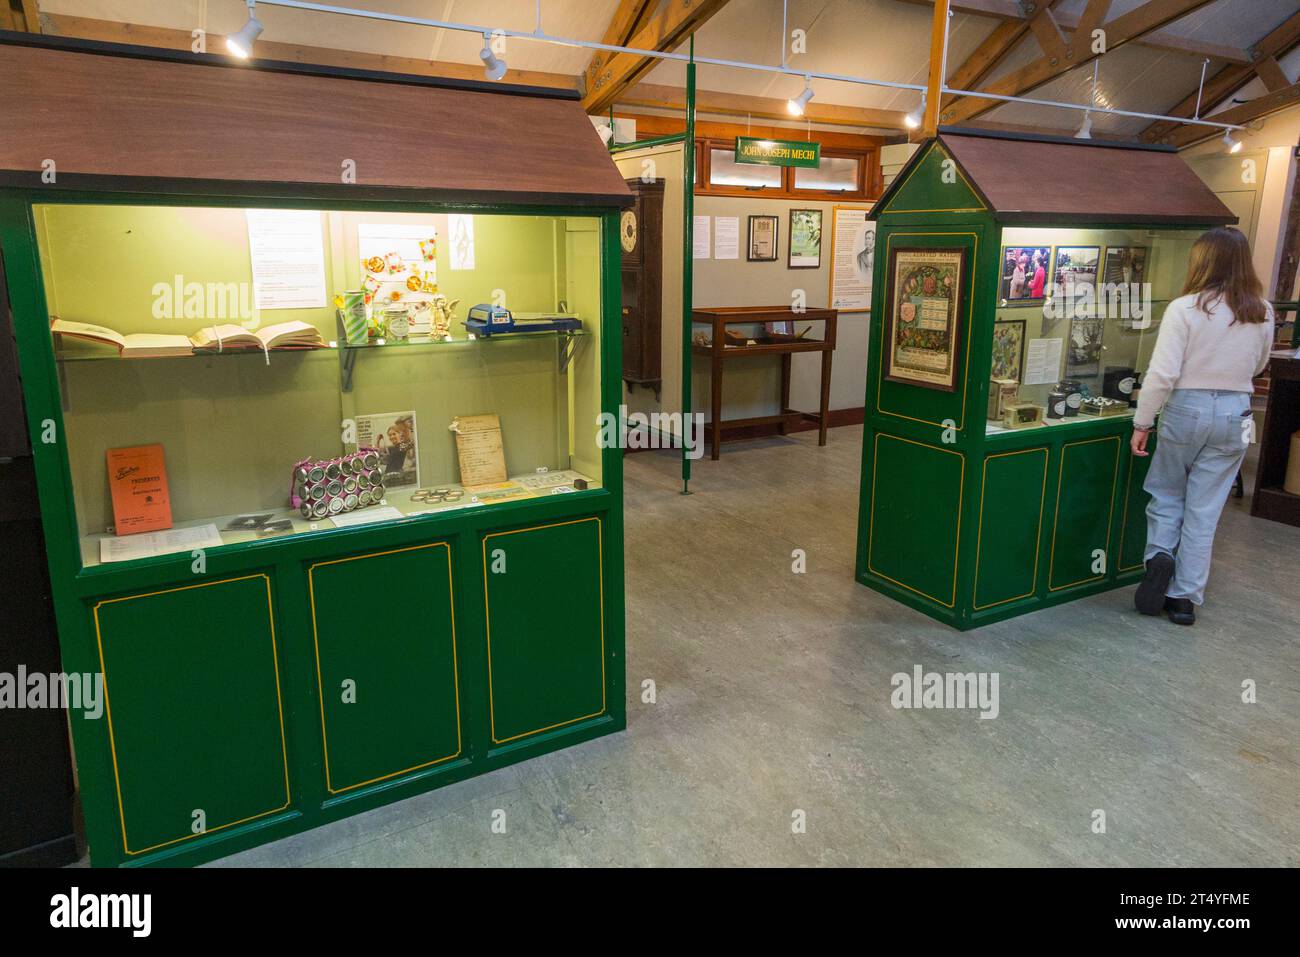 Girl child / kid / kids / children visiter look at display inside interior of the Jam Museum at Wilkin & Sons Limited in Tiptree, Essex, UK. (136) Stock Photo